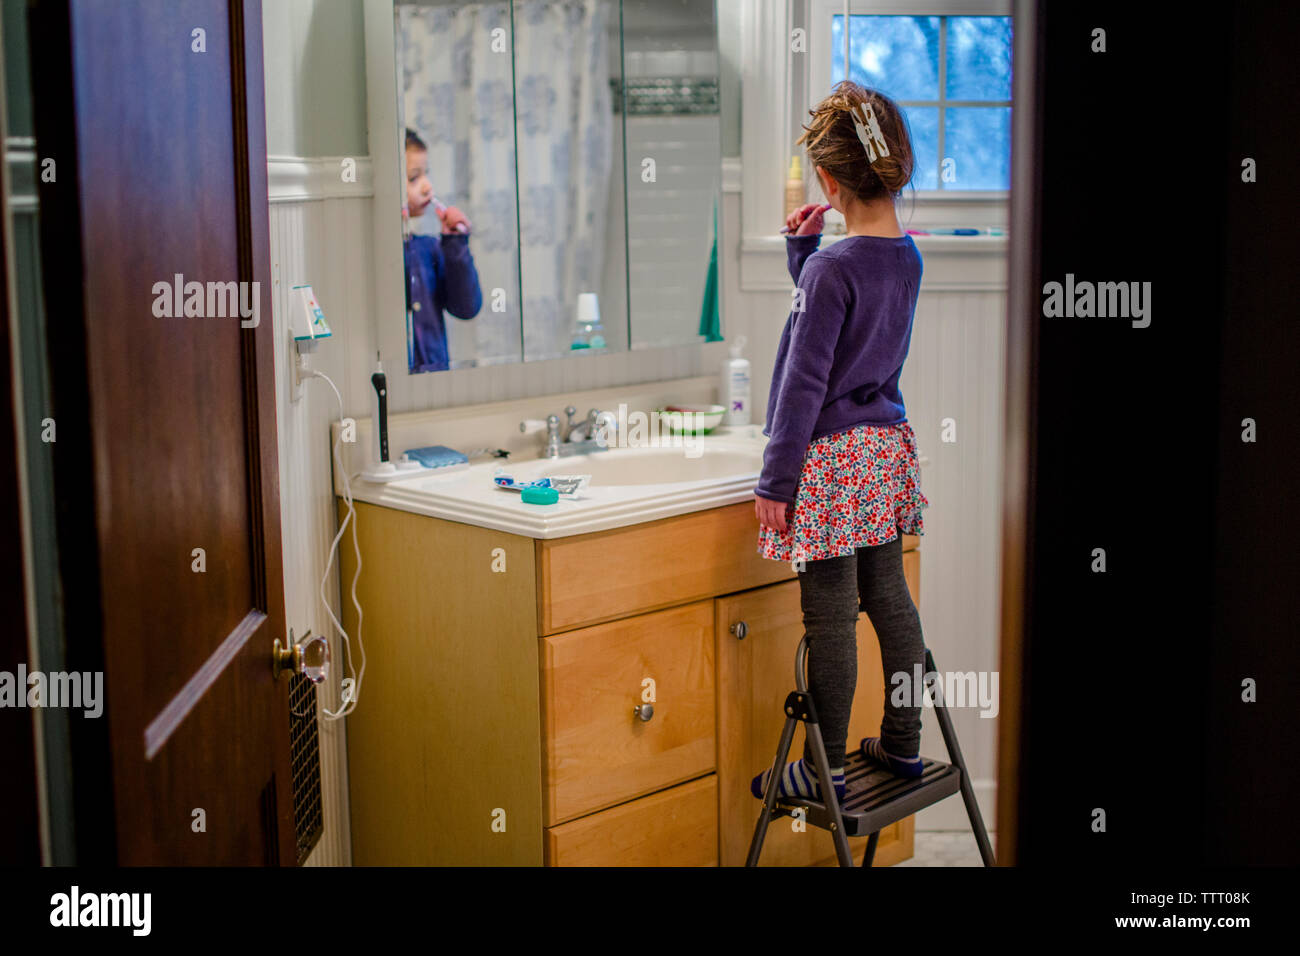 A little girl stands on a stool at the bathroom sink brushing teeth Stock Photo